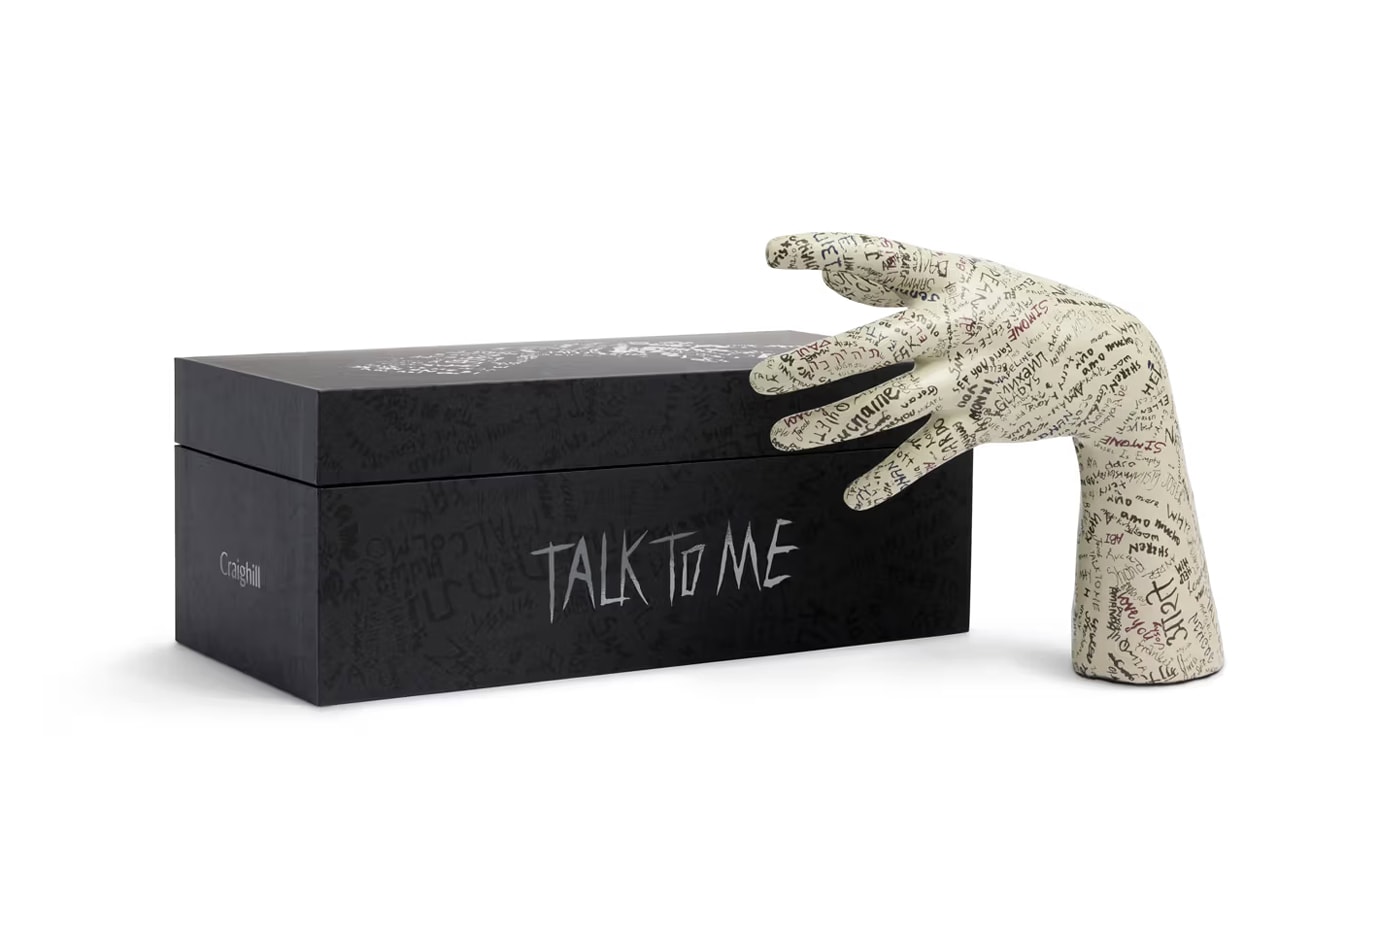 A24 Taps Craighill To Bring the 'Talk to Me' Hand to Life design film hereditary pass light let in gather friends australia ceramic shop 